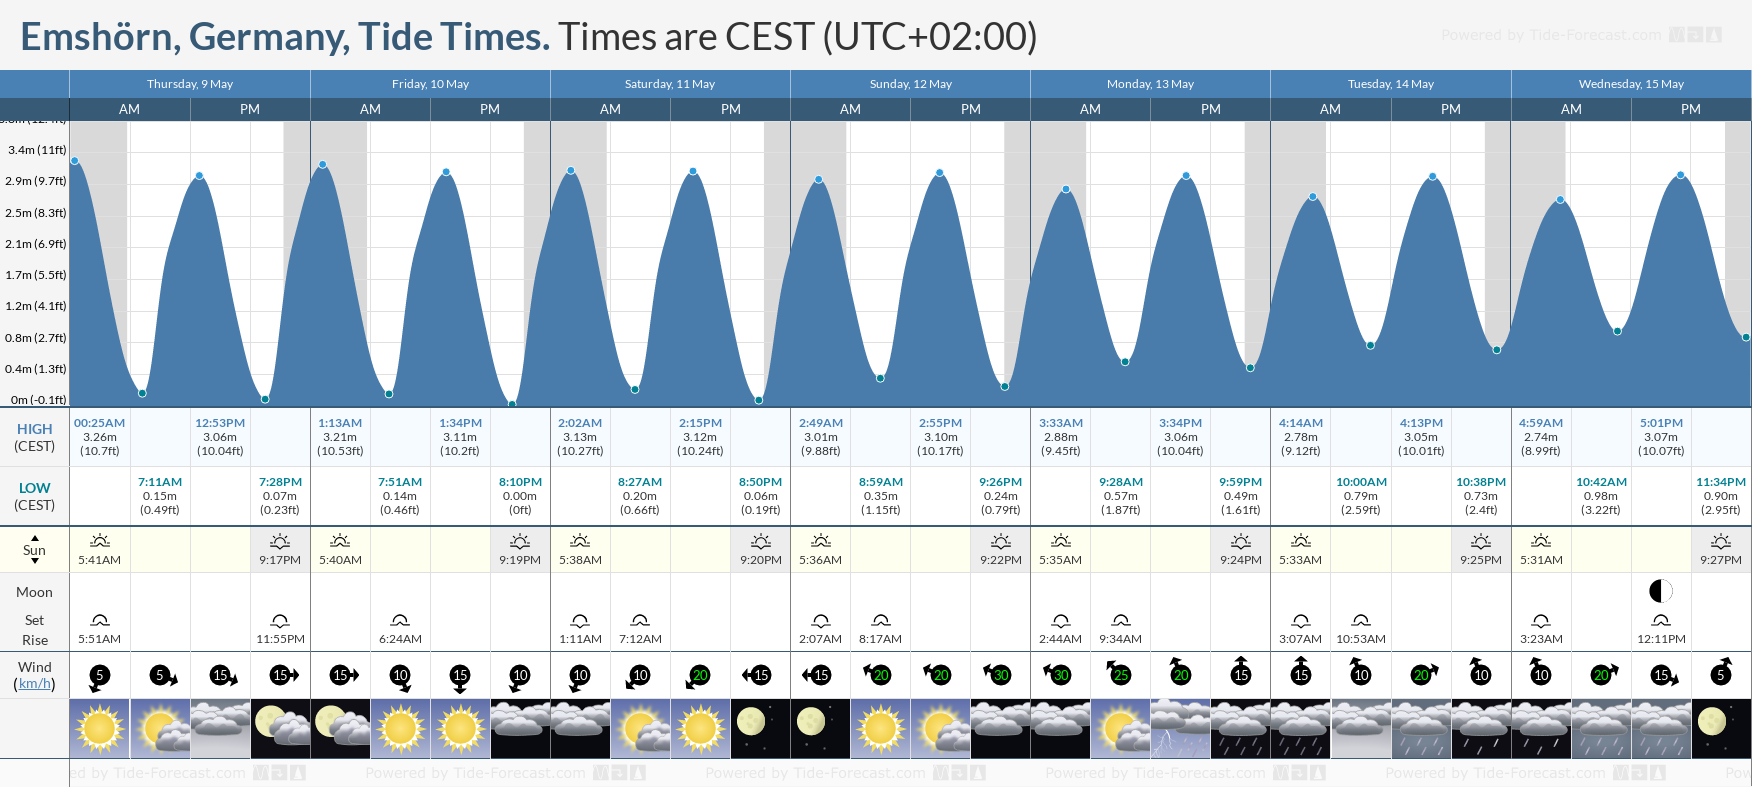 Emshörn, Germany Tide Chart including high and low tide tide times for the next 7 days